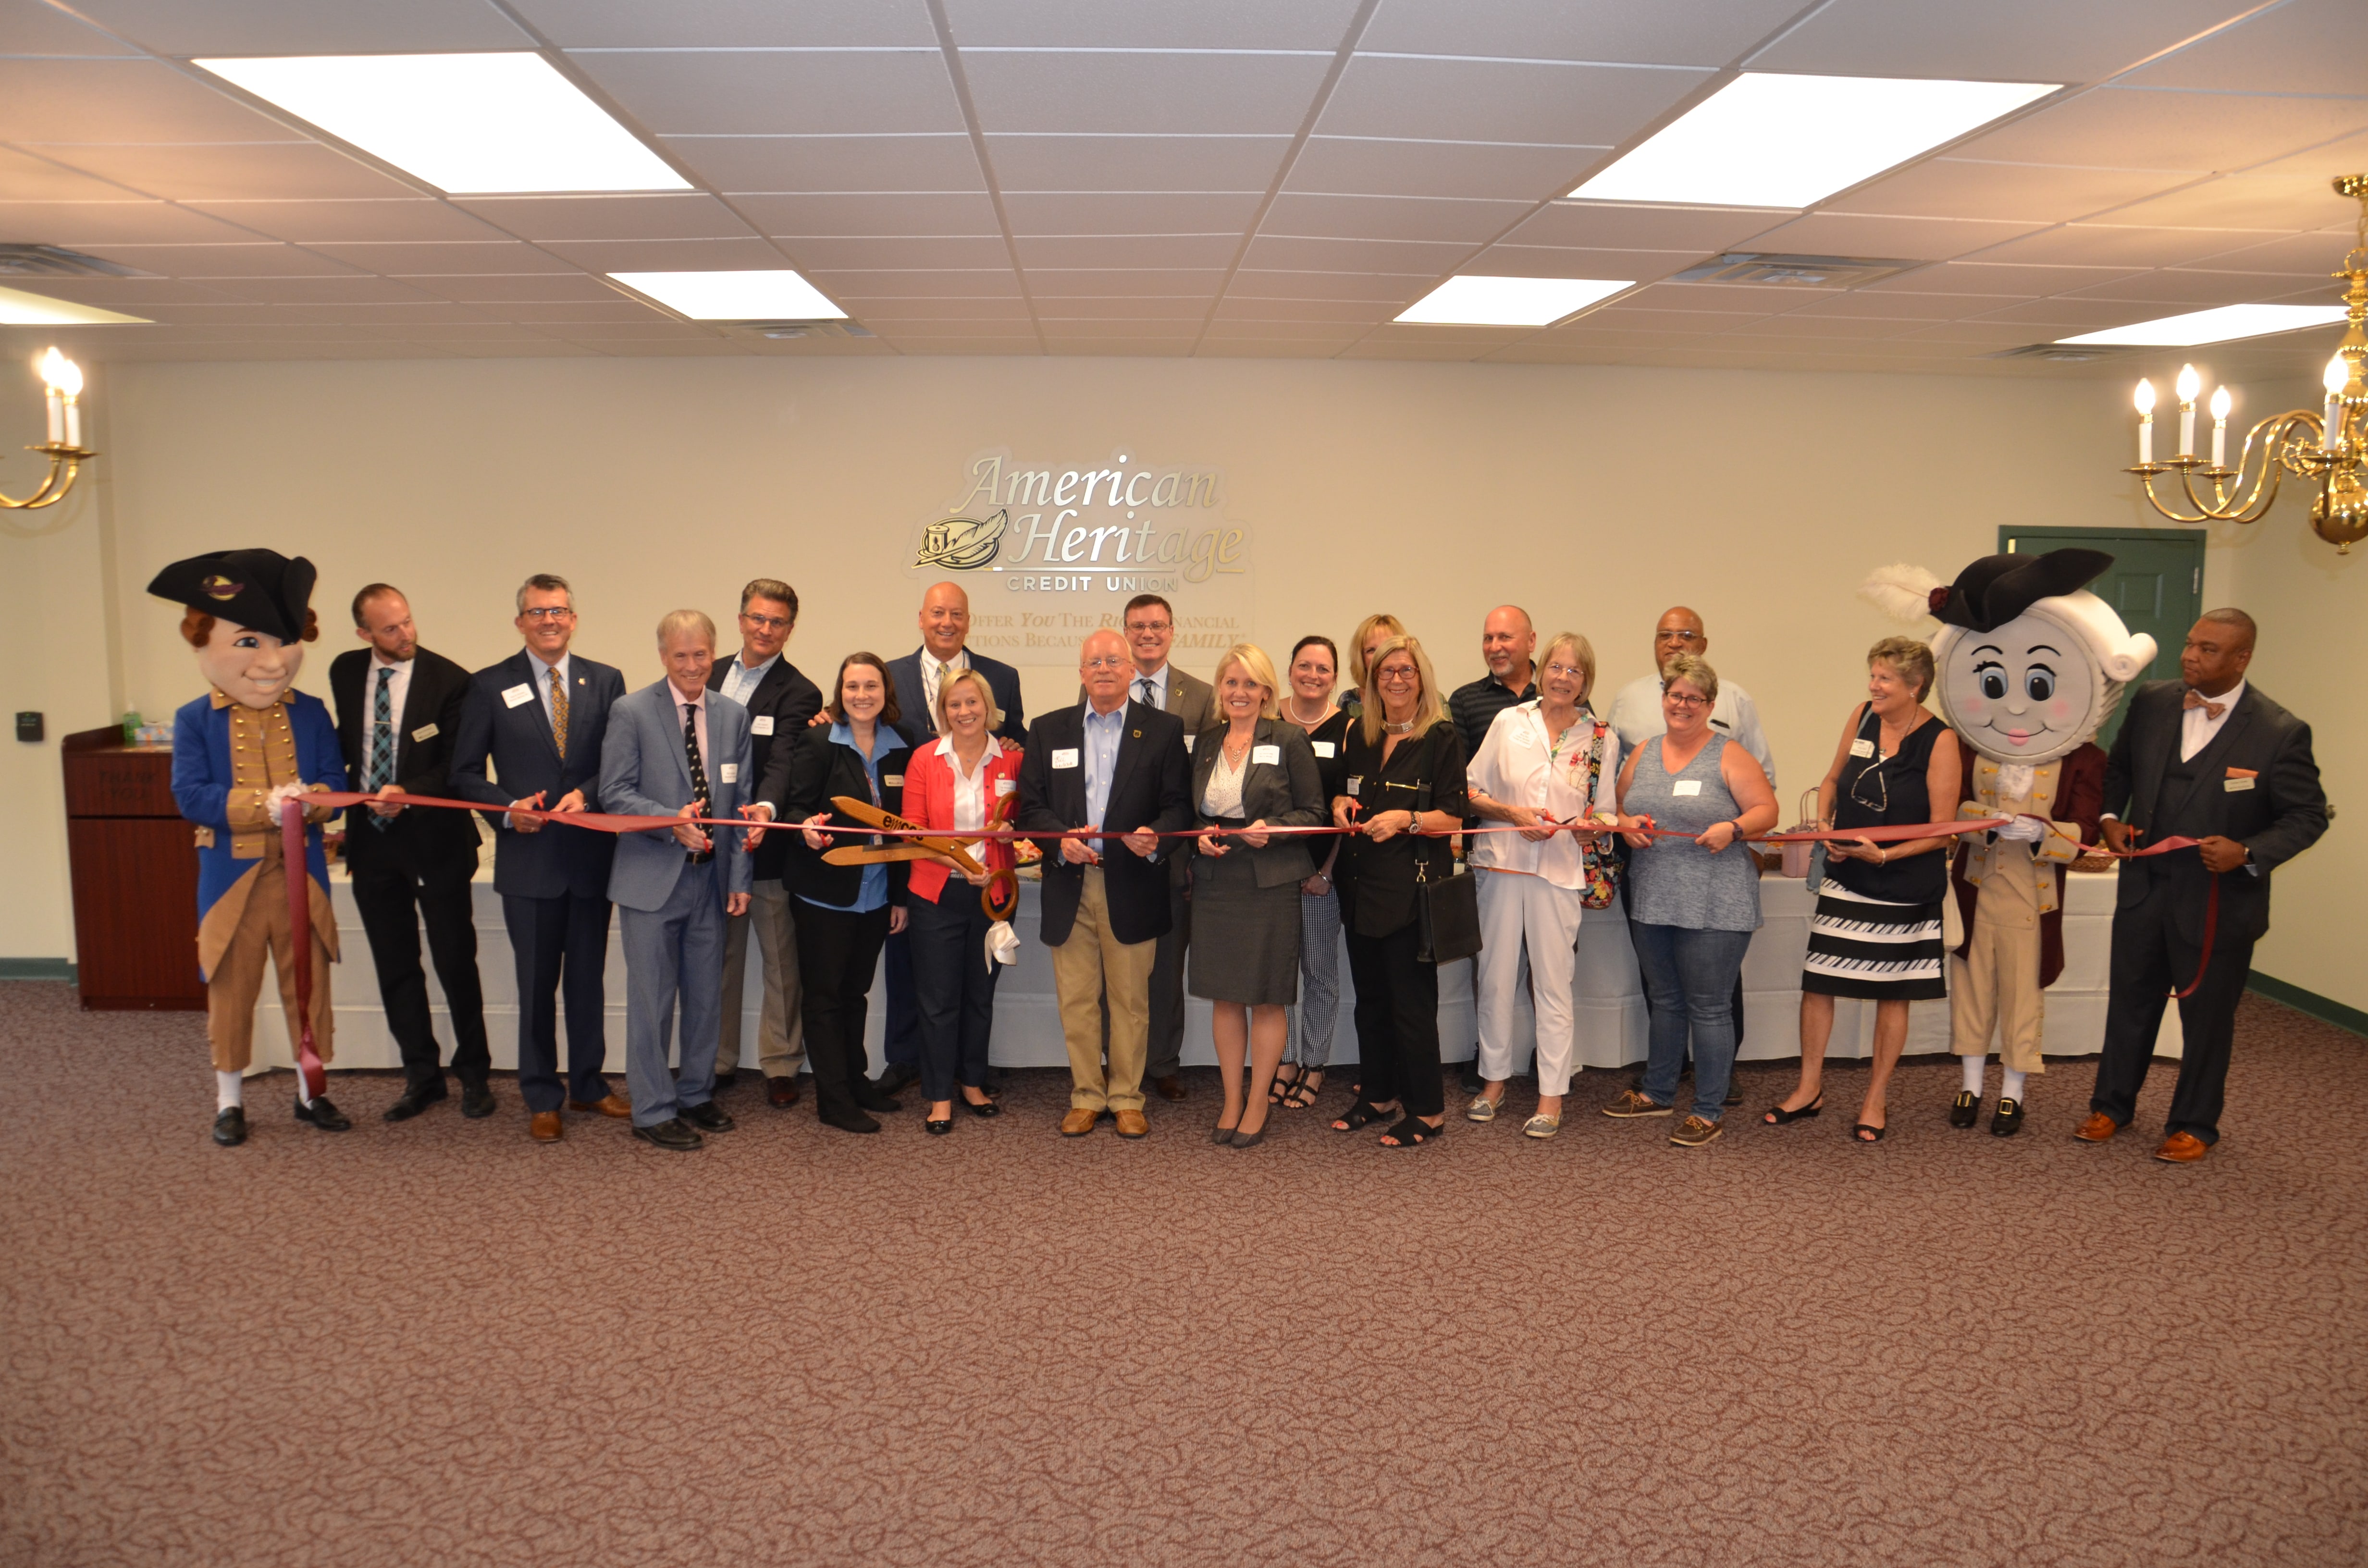 Bruce Foulke is pictured with Maria Collett, Wendy Klinghoffer, Jo-Anne Zapata, Mary Dare, Co-Founder and Executive Vice President of the Greater Horsham Chamber of Commerce, American Heritage Employees, local dignitaries and business owners.